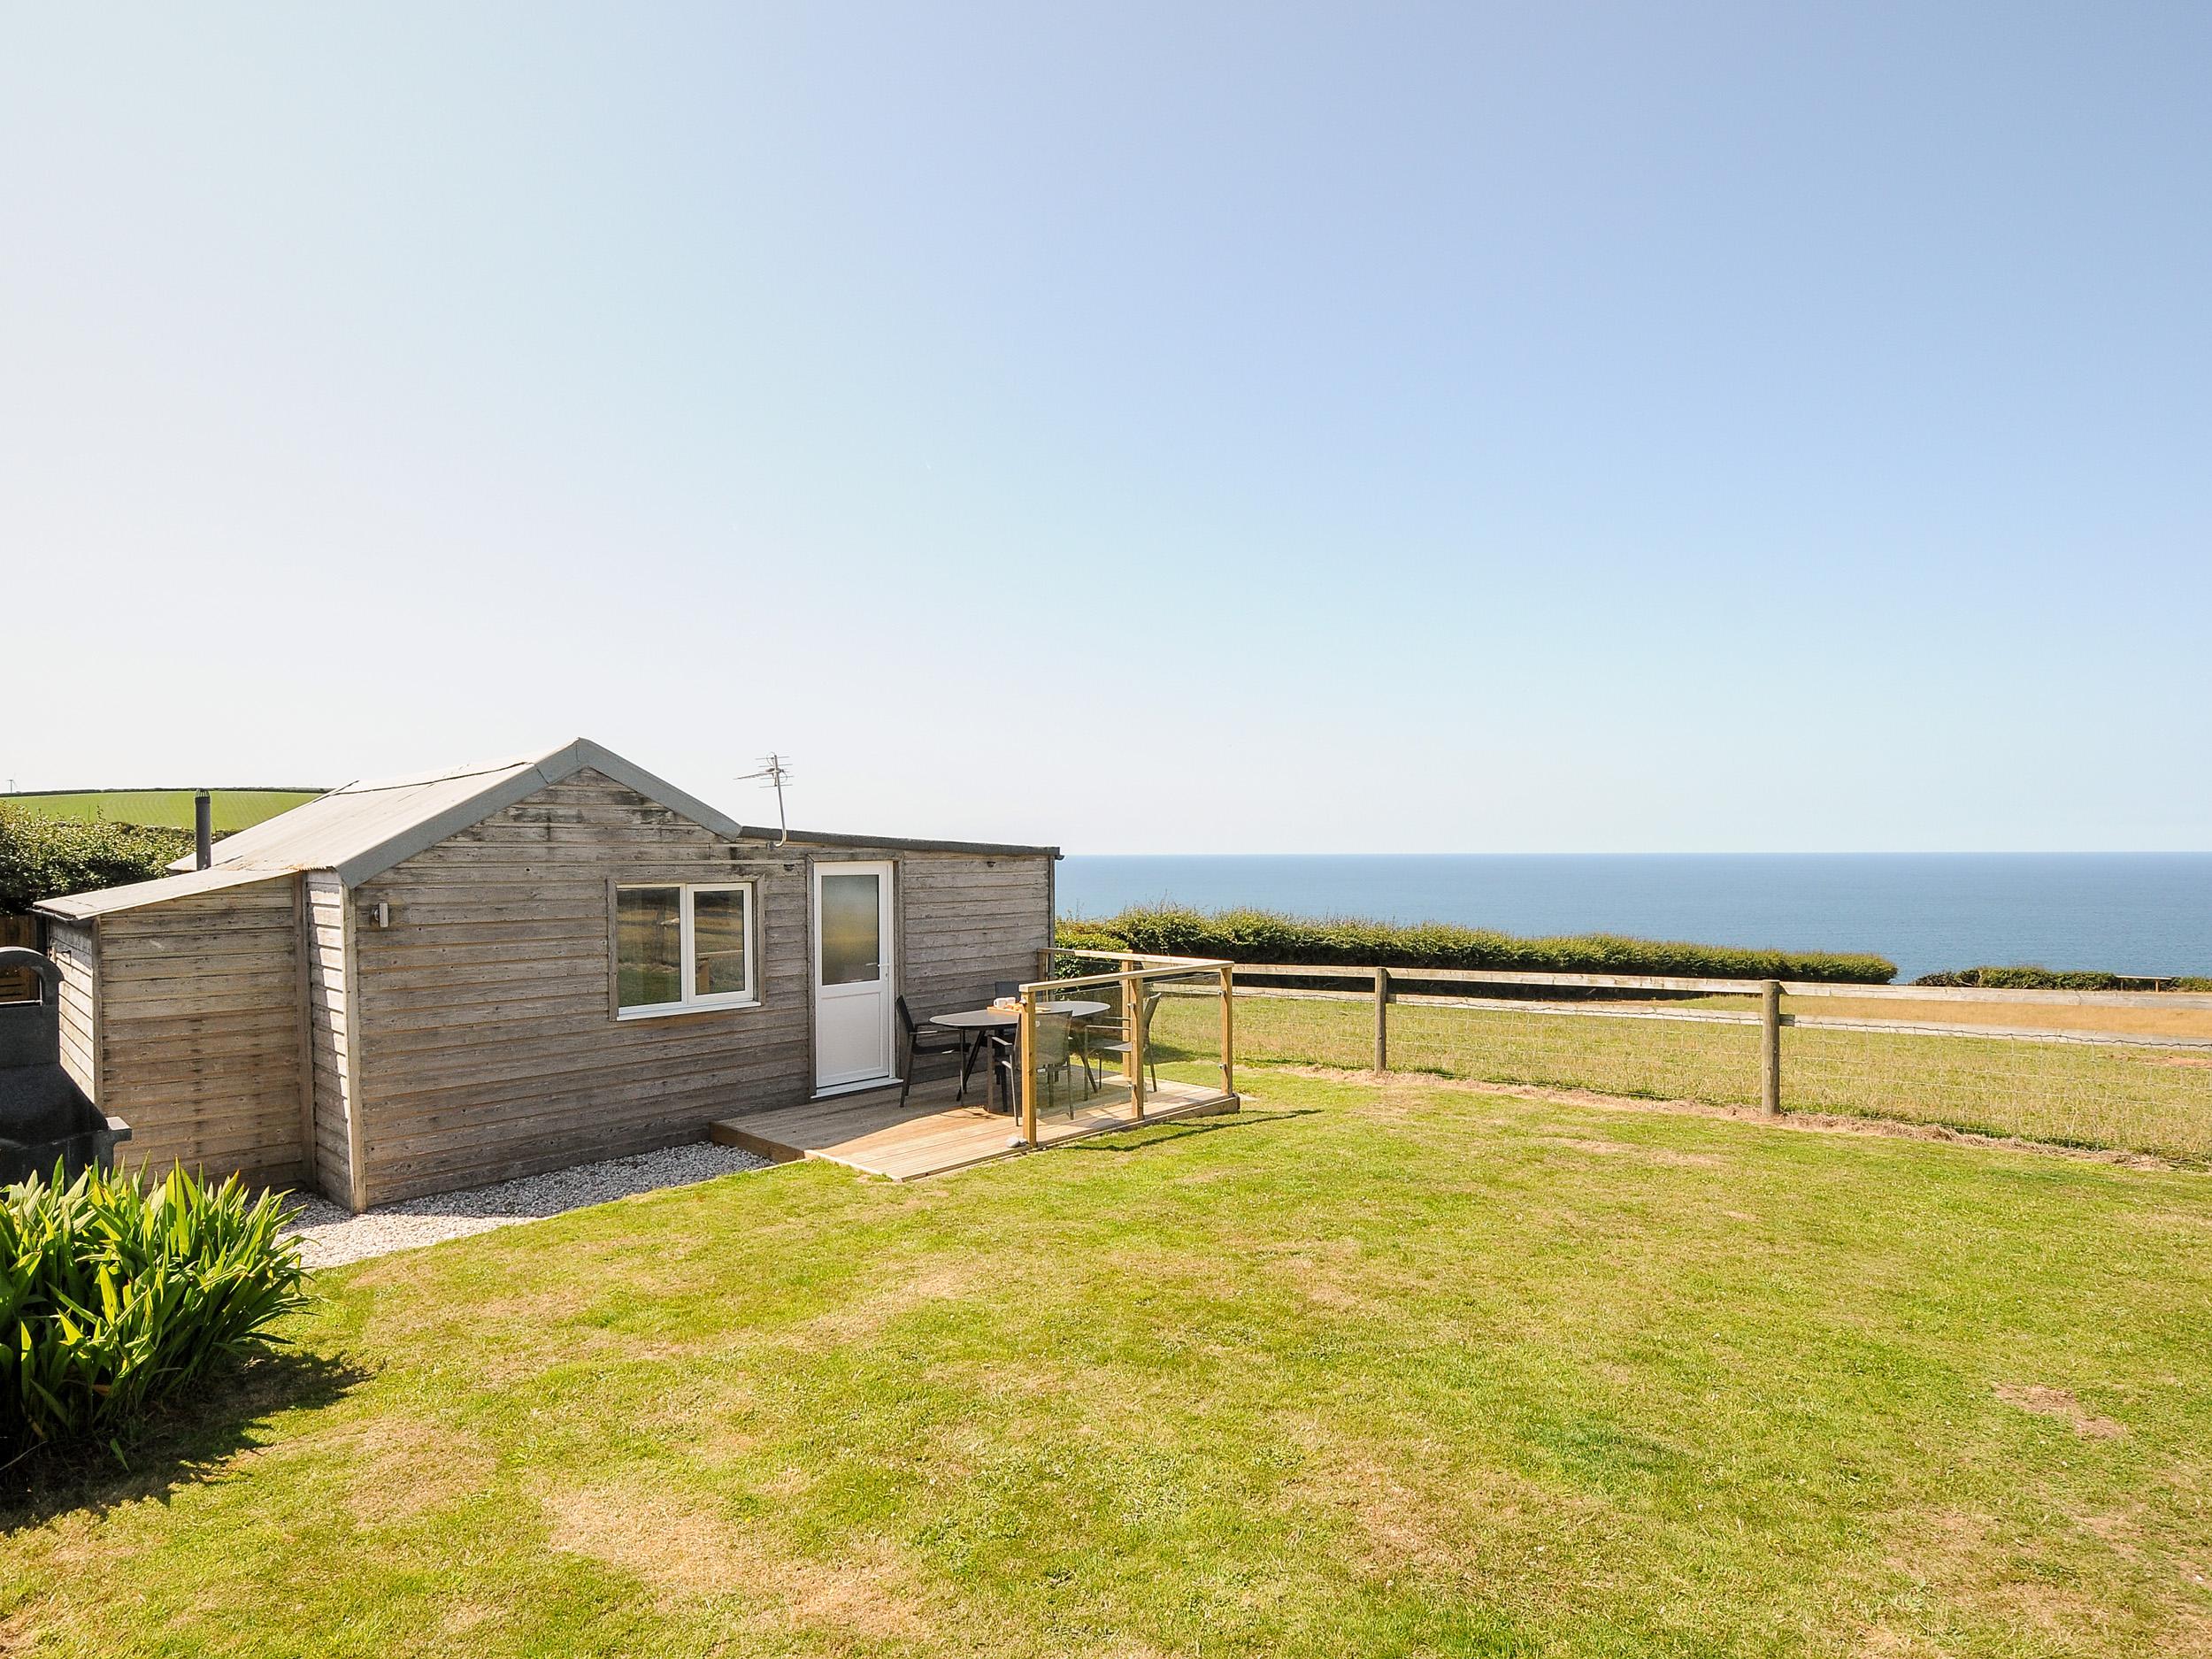 Lundy View Chalet